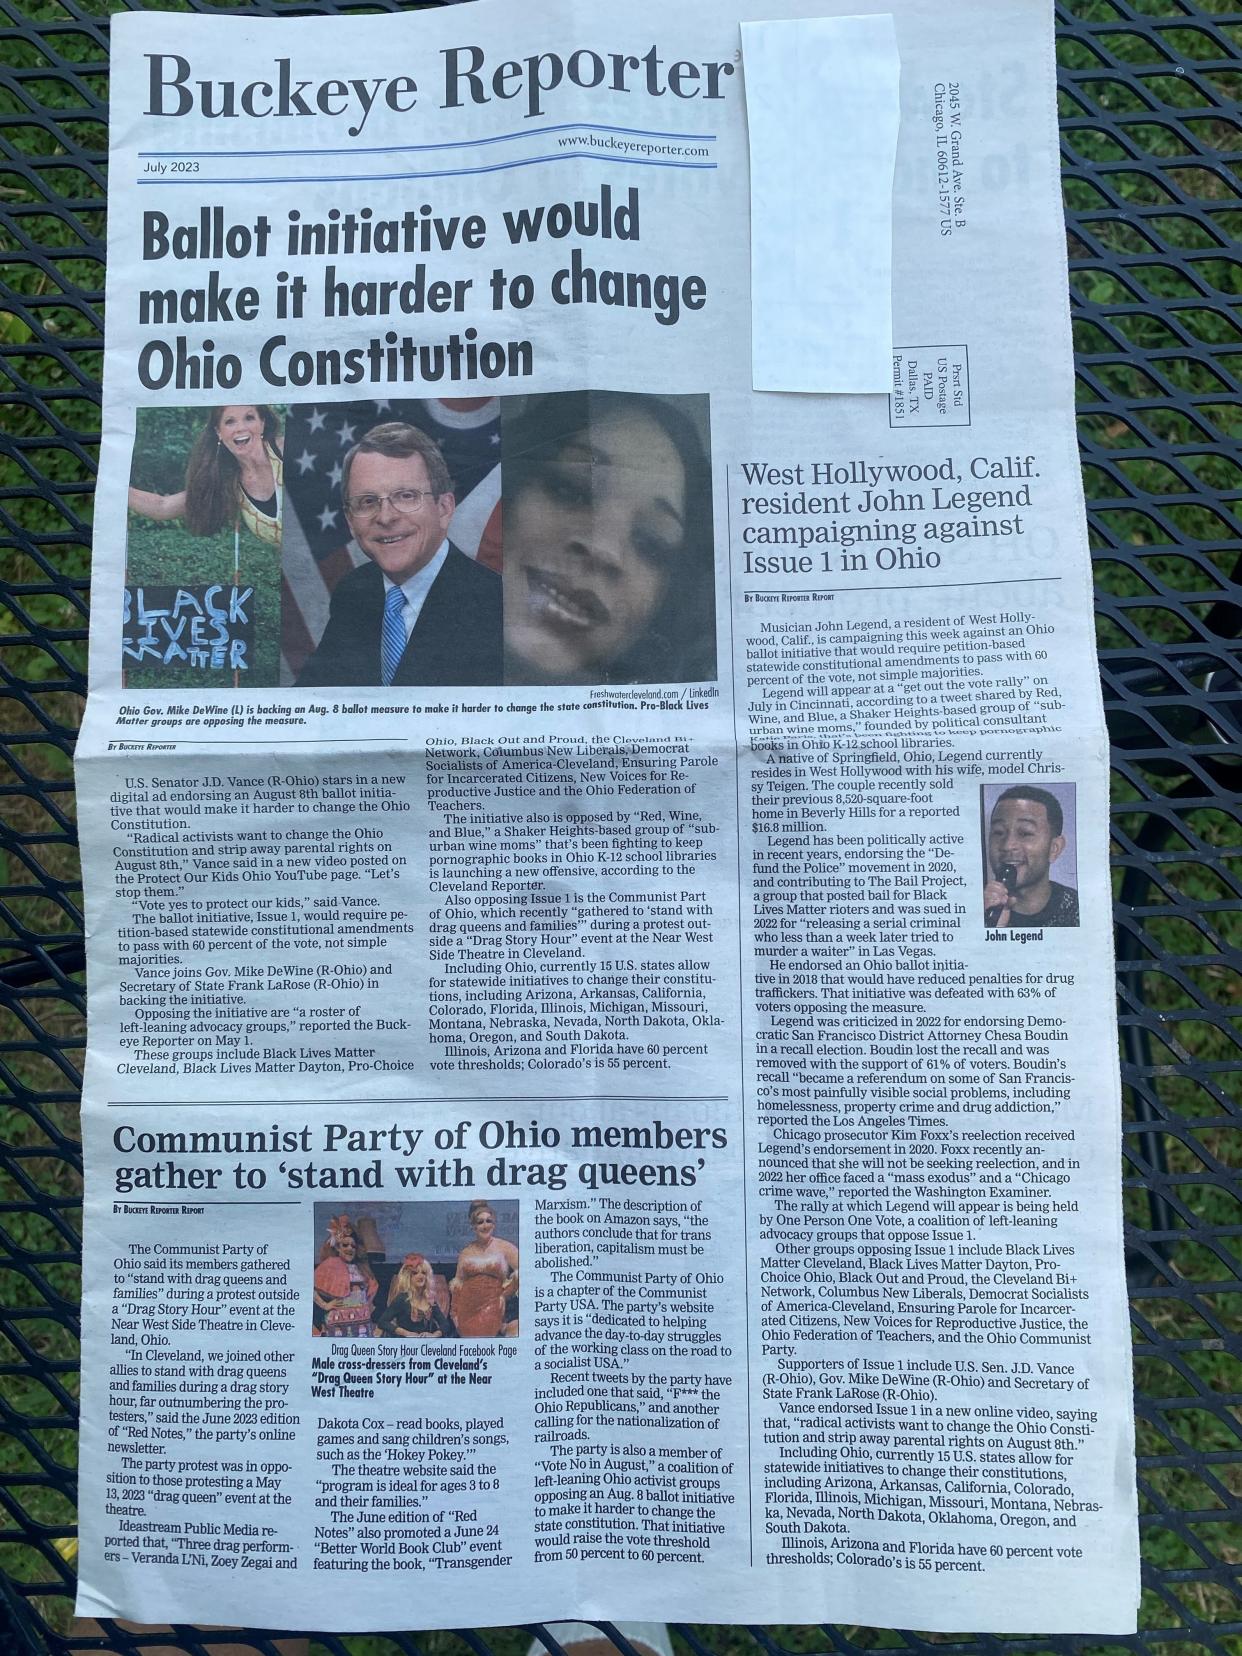 A copy of the July 2023 Buckeye Reporter mailed to Ohio residents.